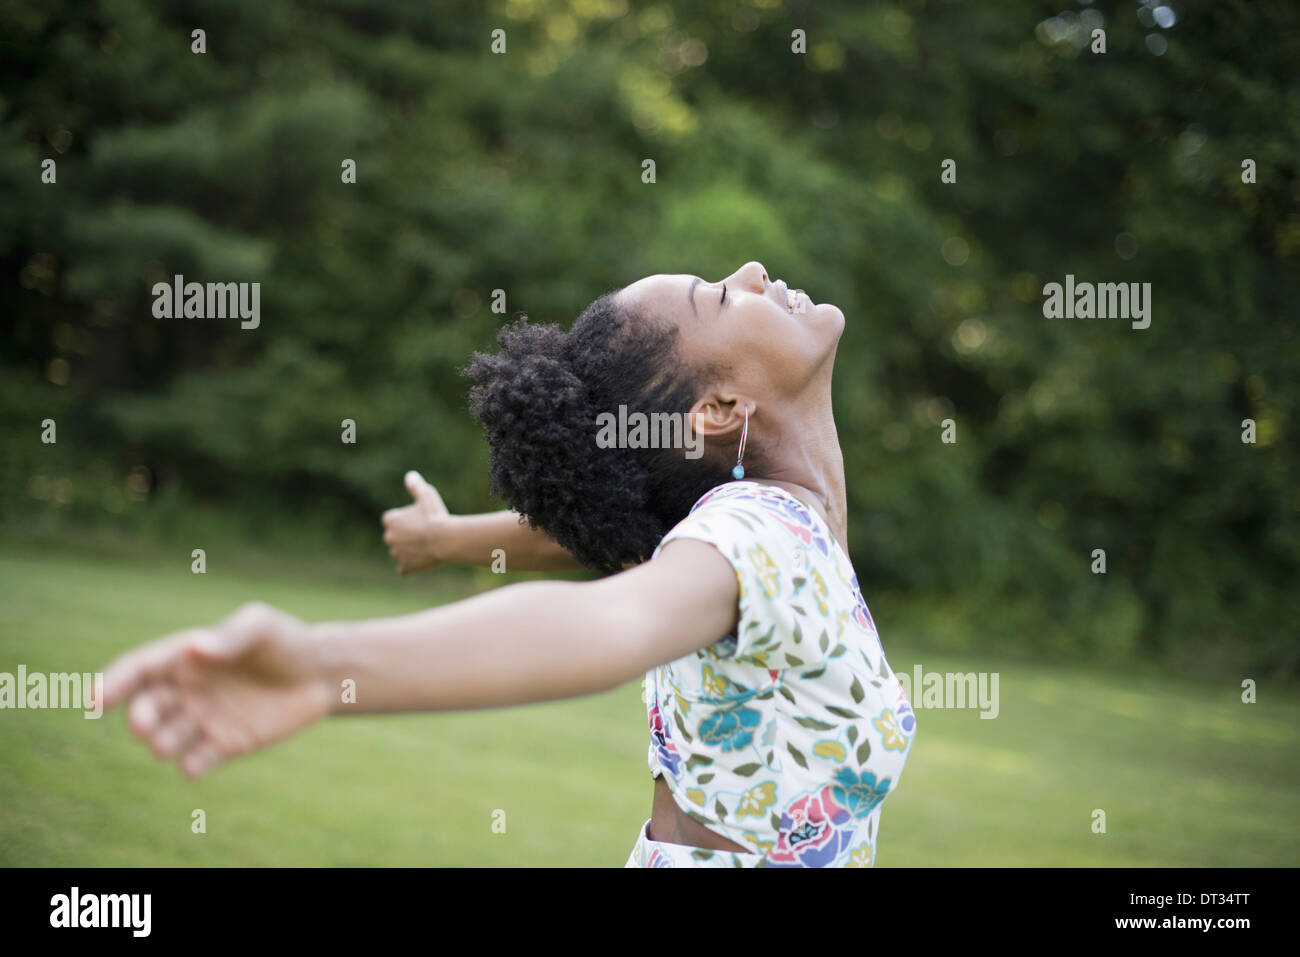 A young woman in a summer dress with her arms outstretched celebrating freedom Stock Photo